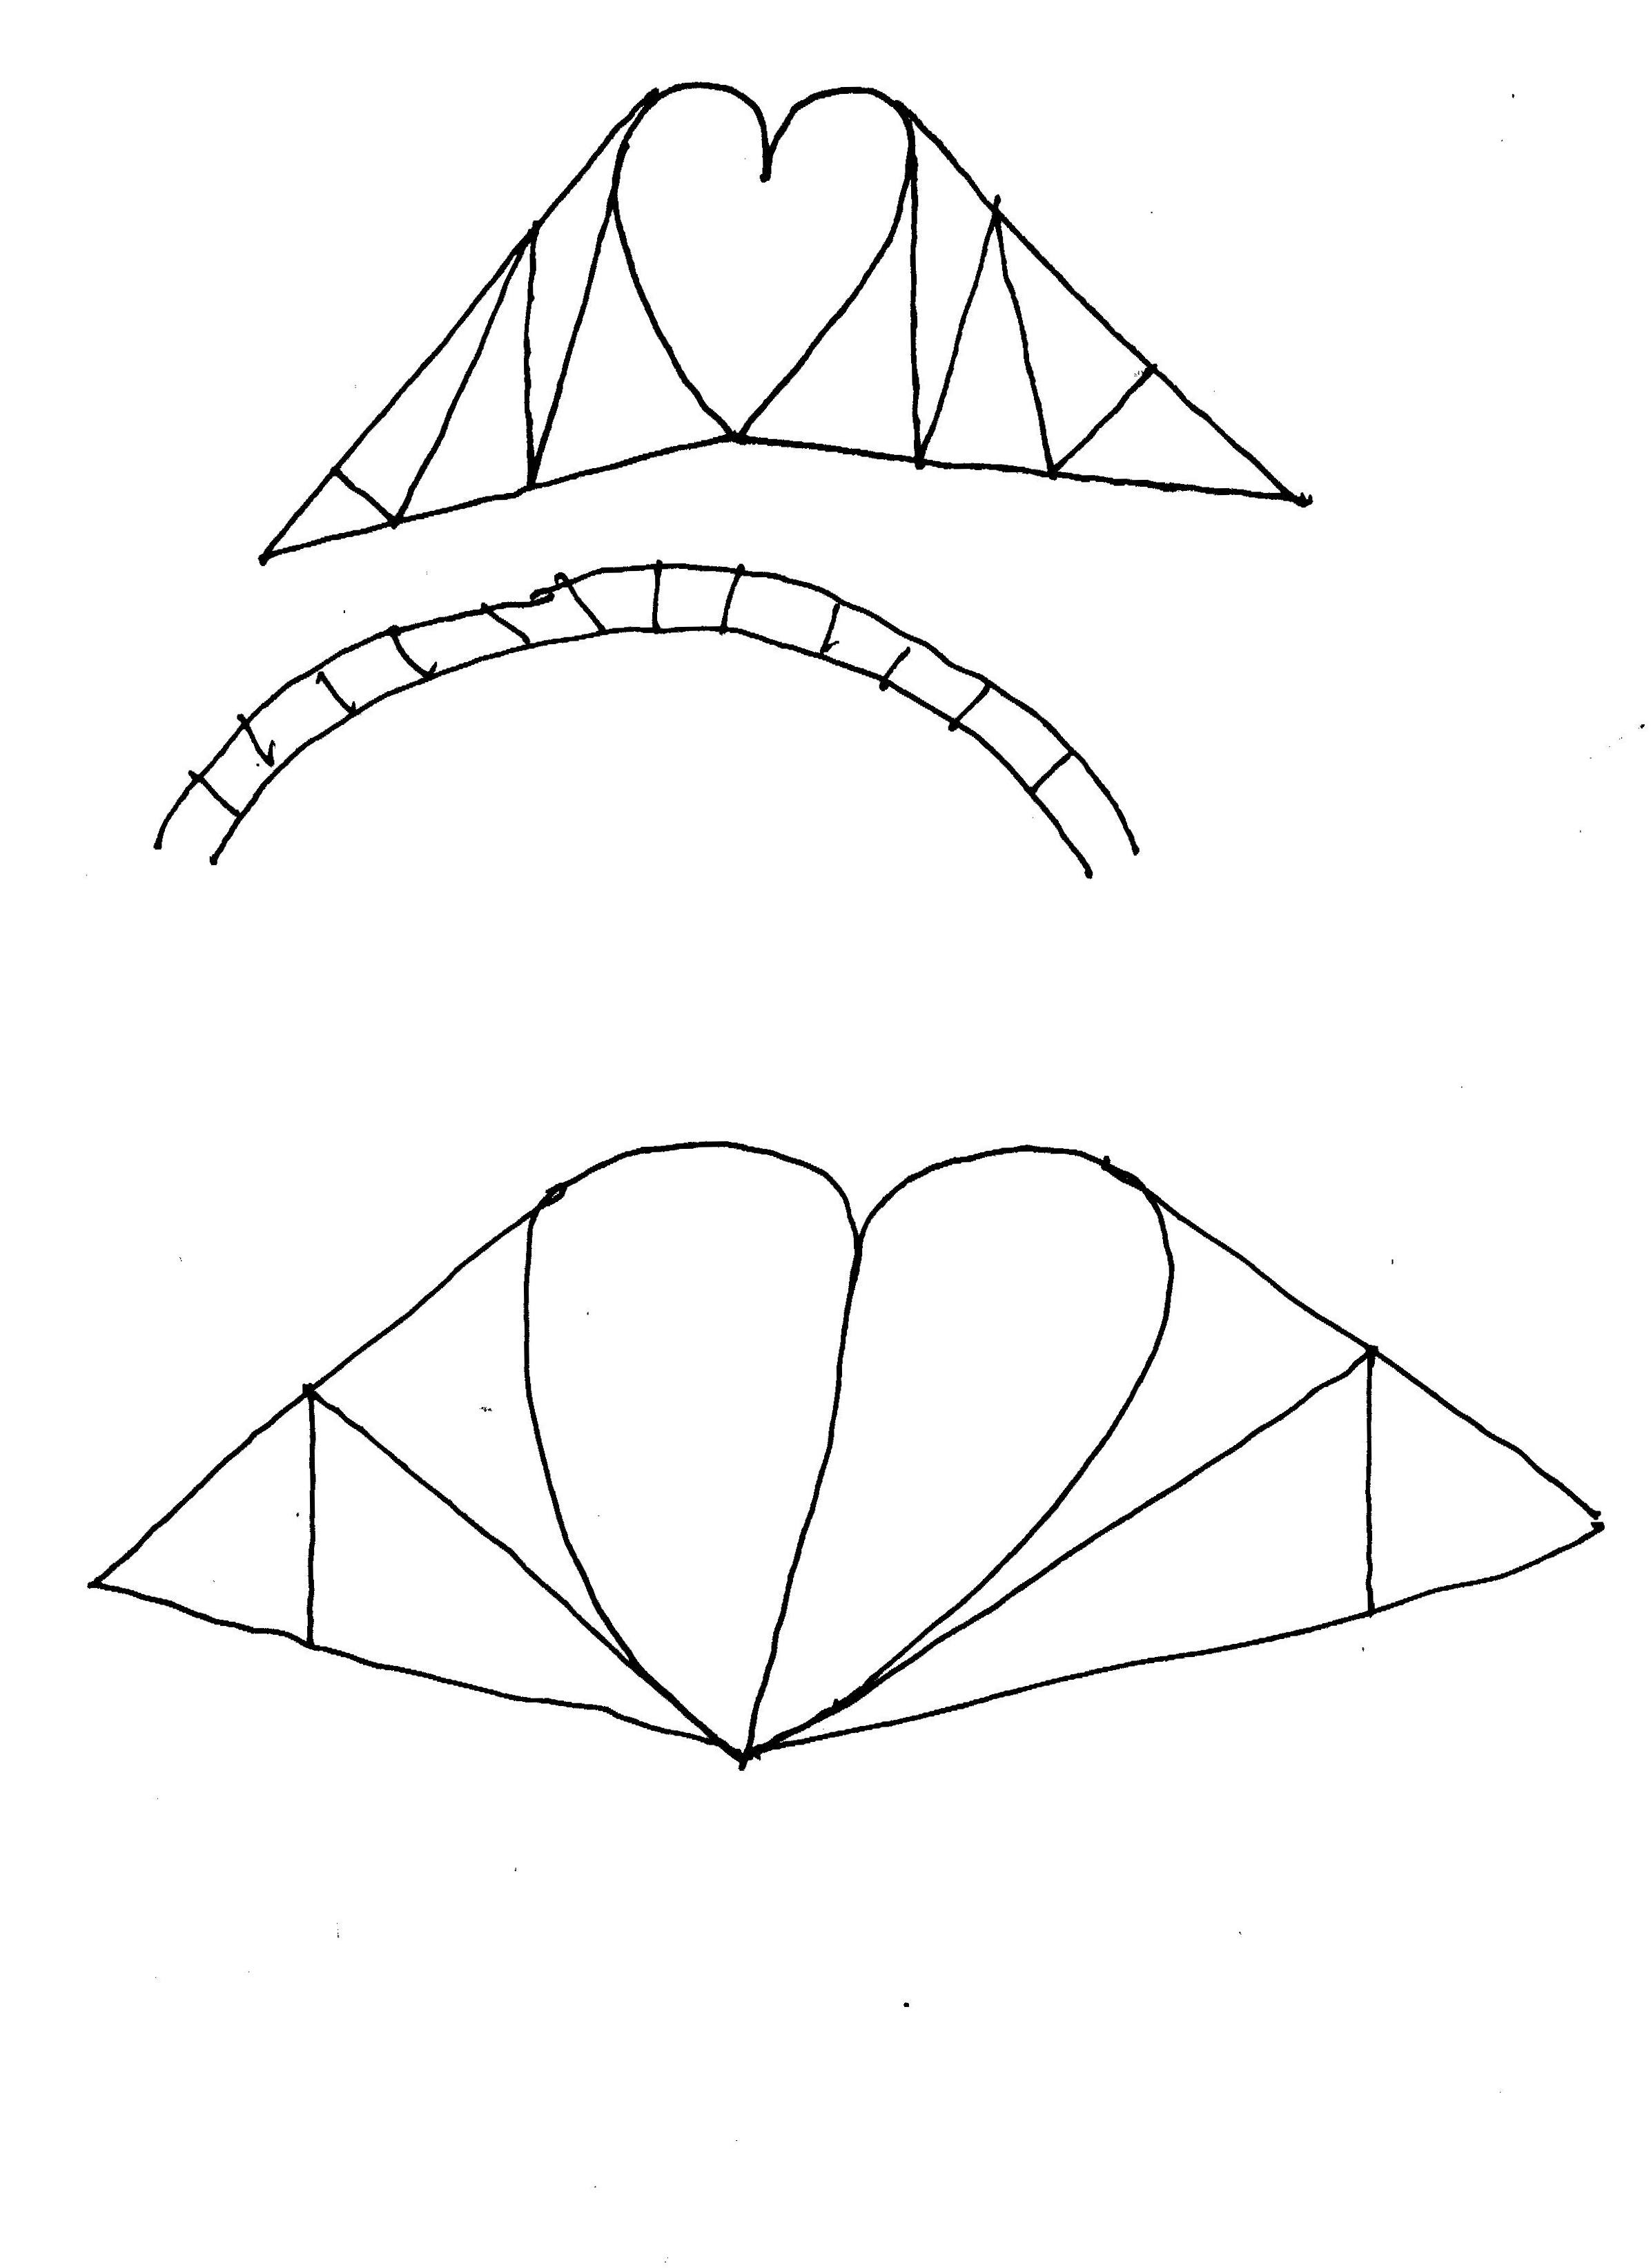 pen drawing of trusses with heart shaped pieces